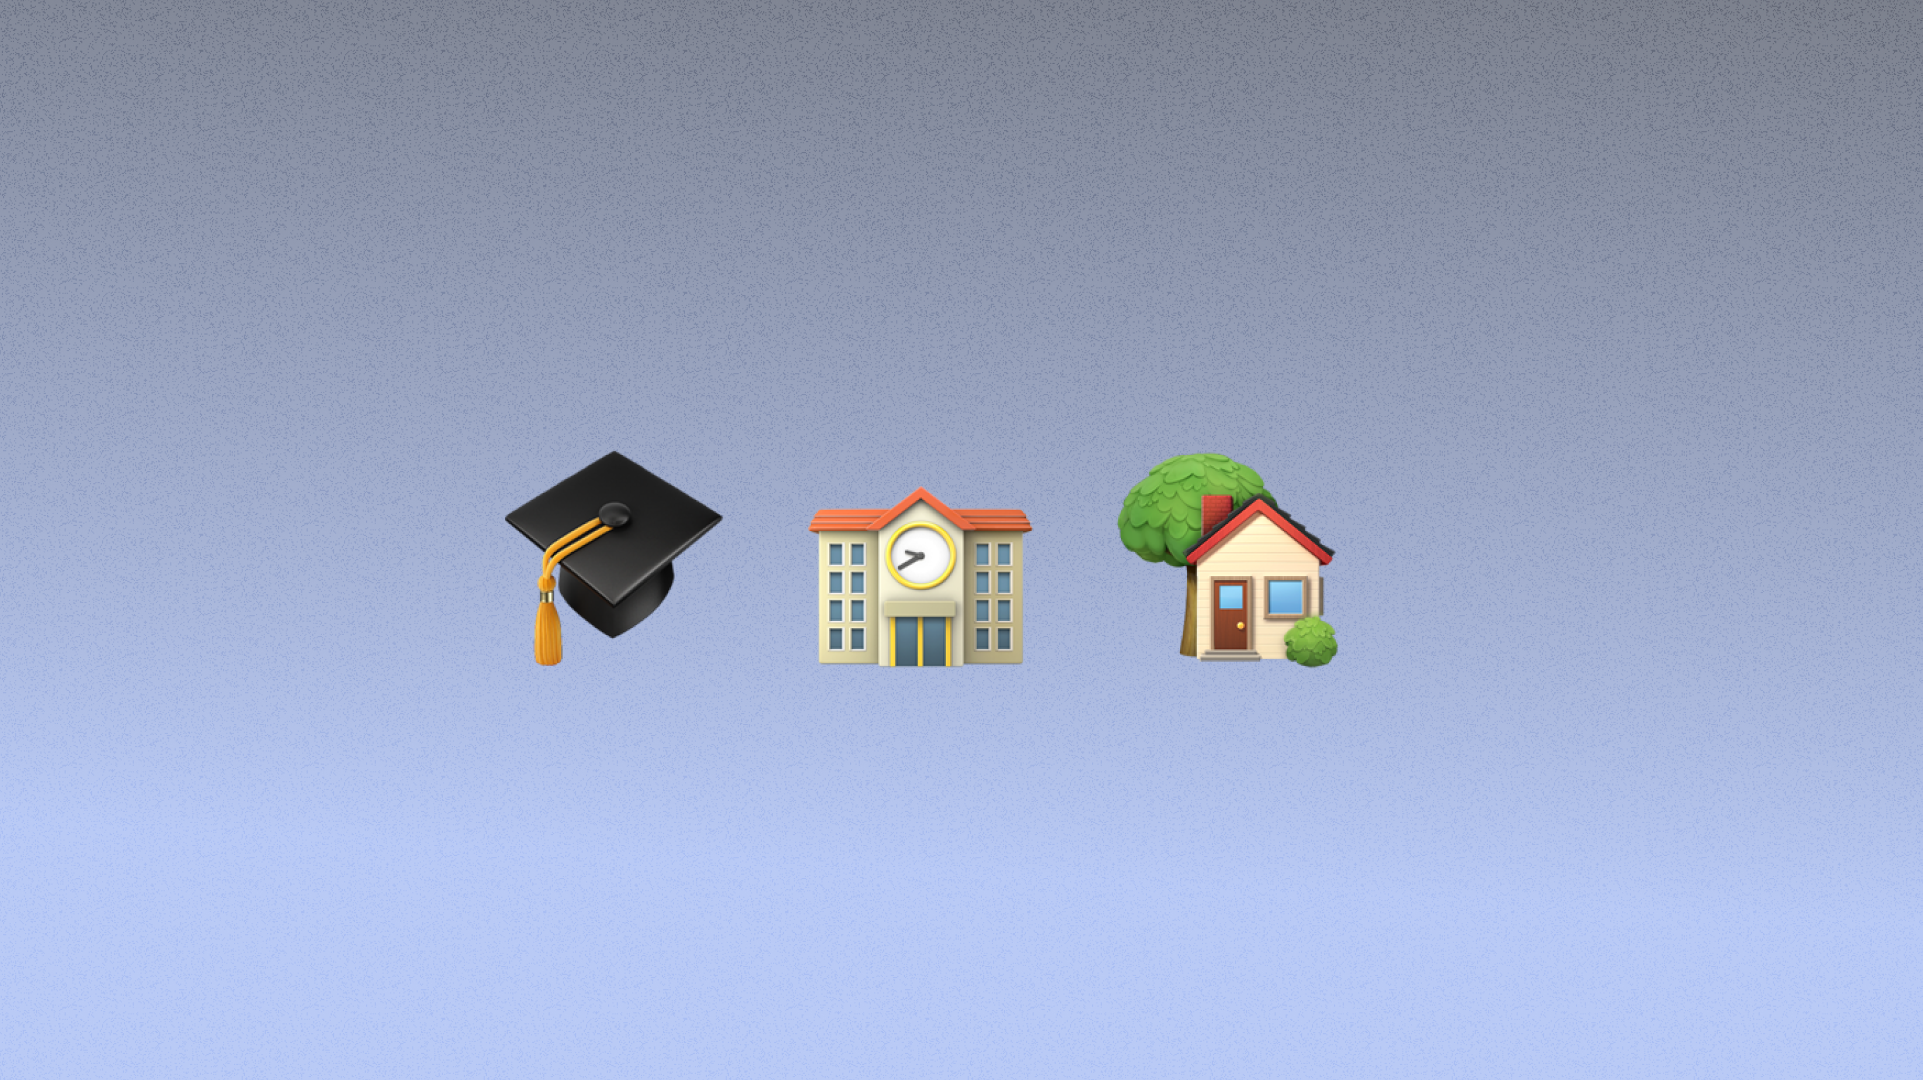 Cover photo for blog post titled University of Melbourne Student Accommodation Guide | Colleges, Villages And More. Symbols on gradient showing: graduate hat, university campus and house.